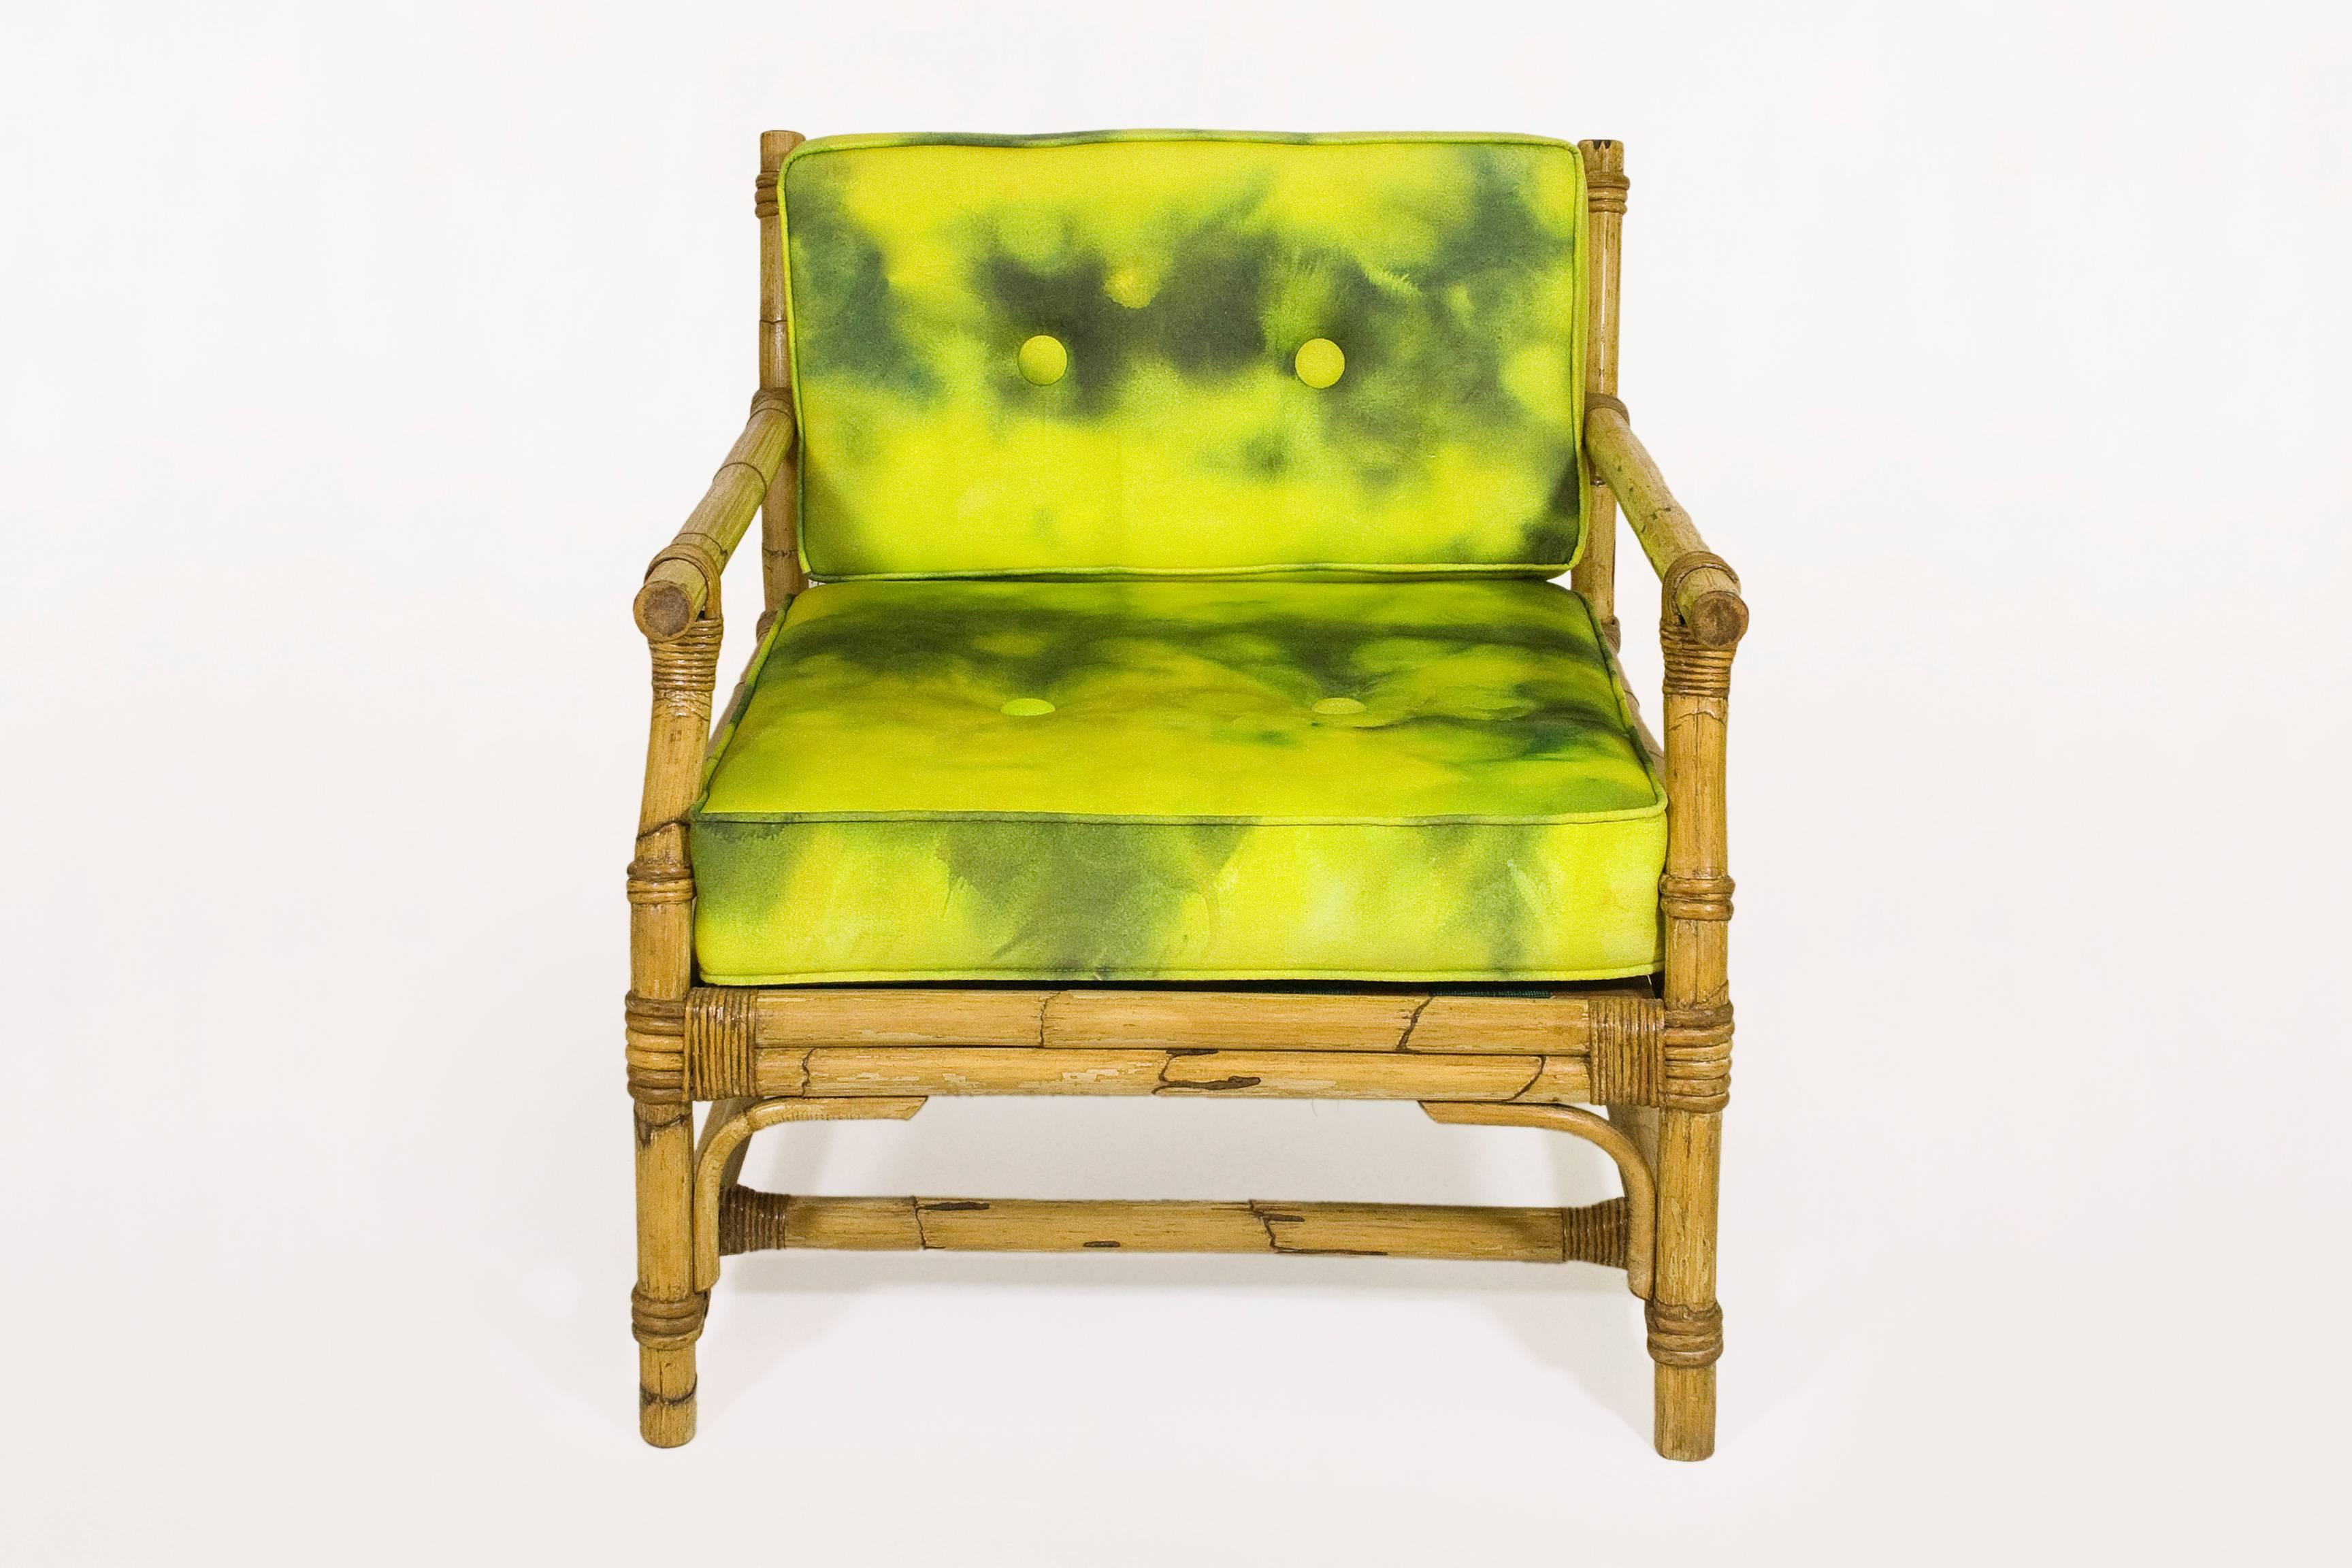 Pair of Bamboo Lounge Chairs
Bamboo Structure
Cushions Recently ReUpholstered with Serge Castella's 